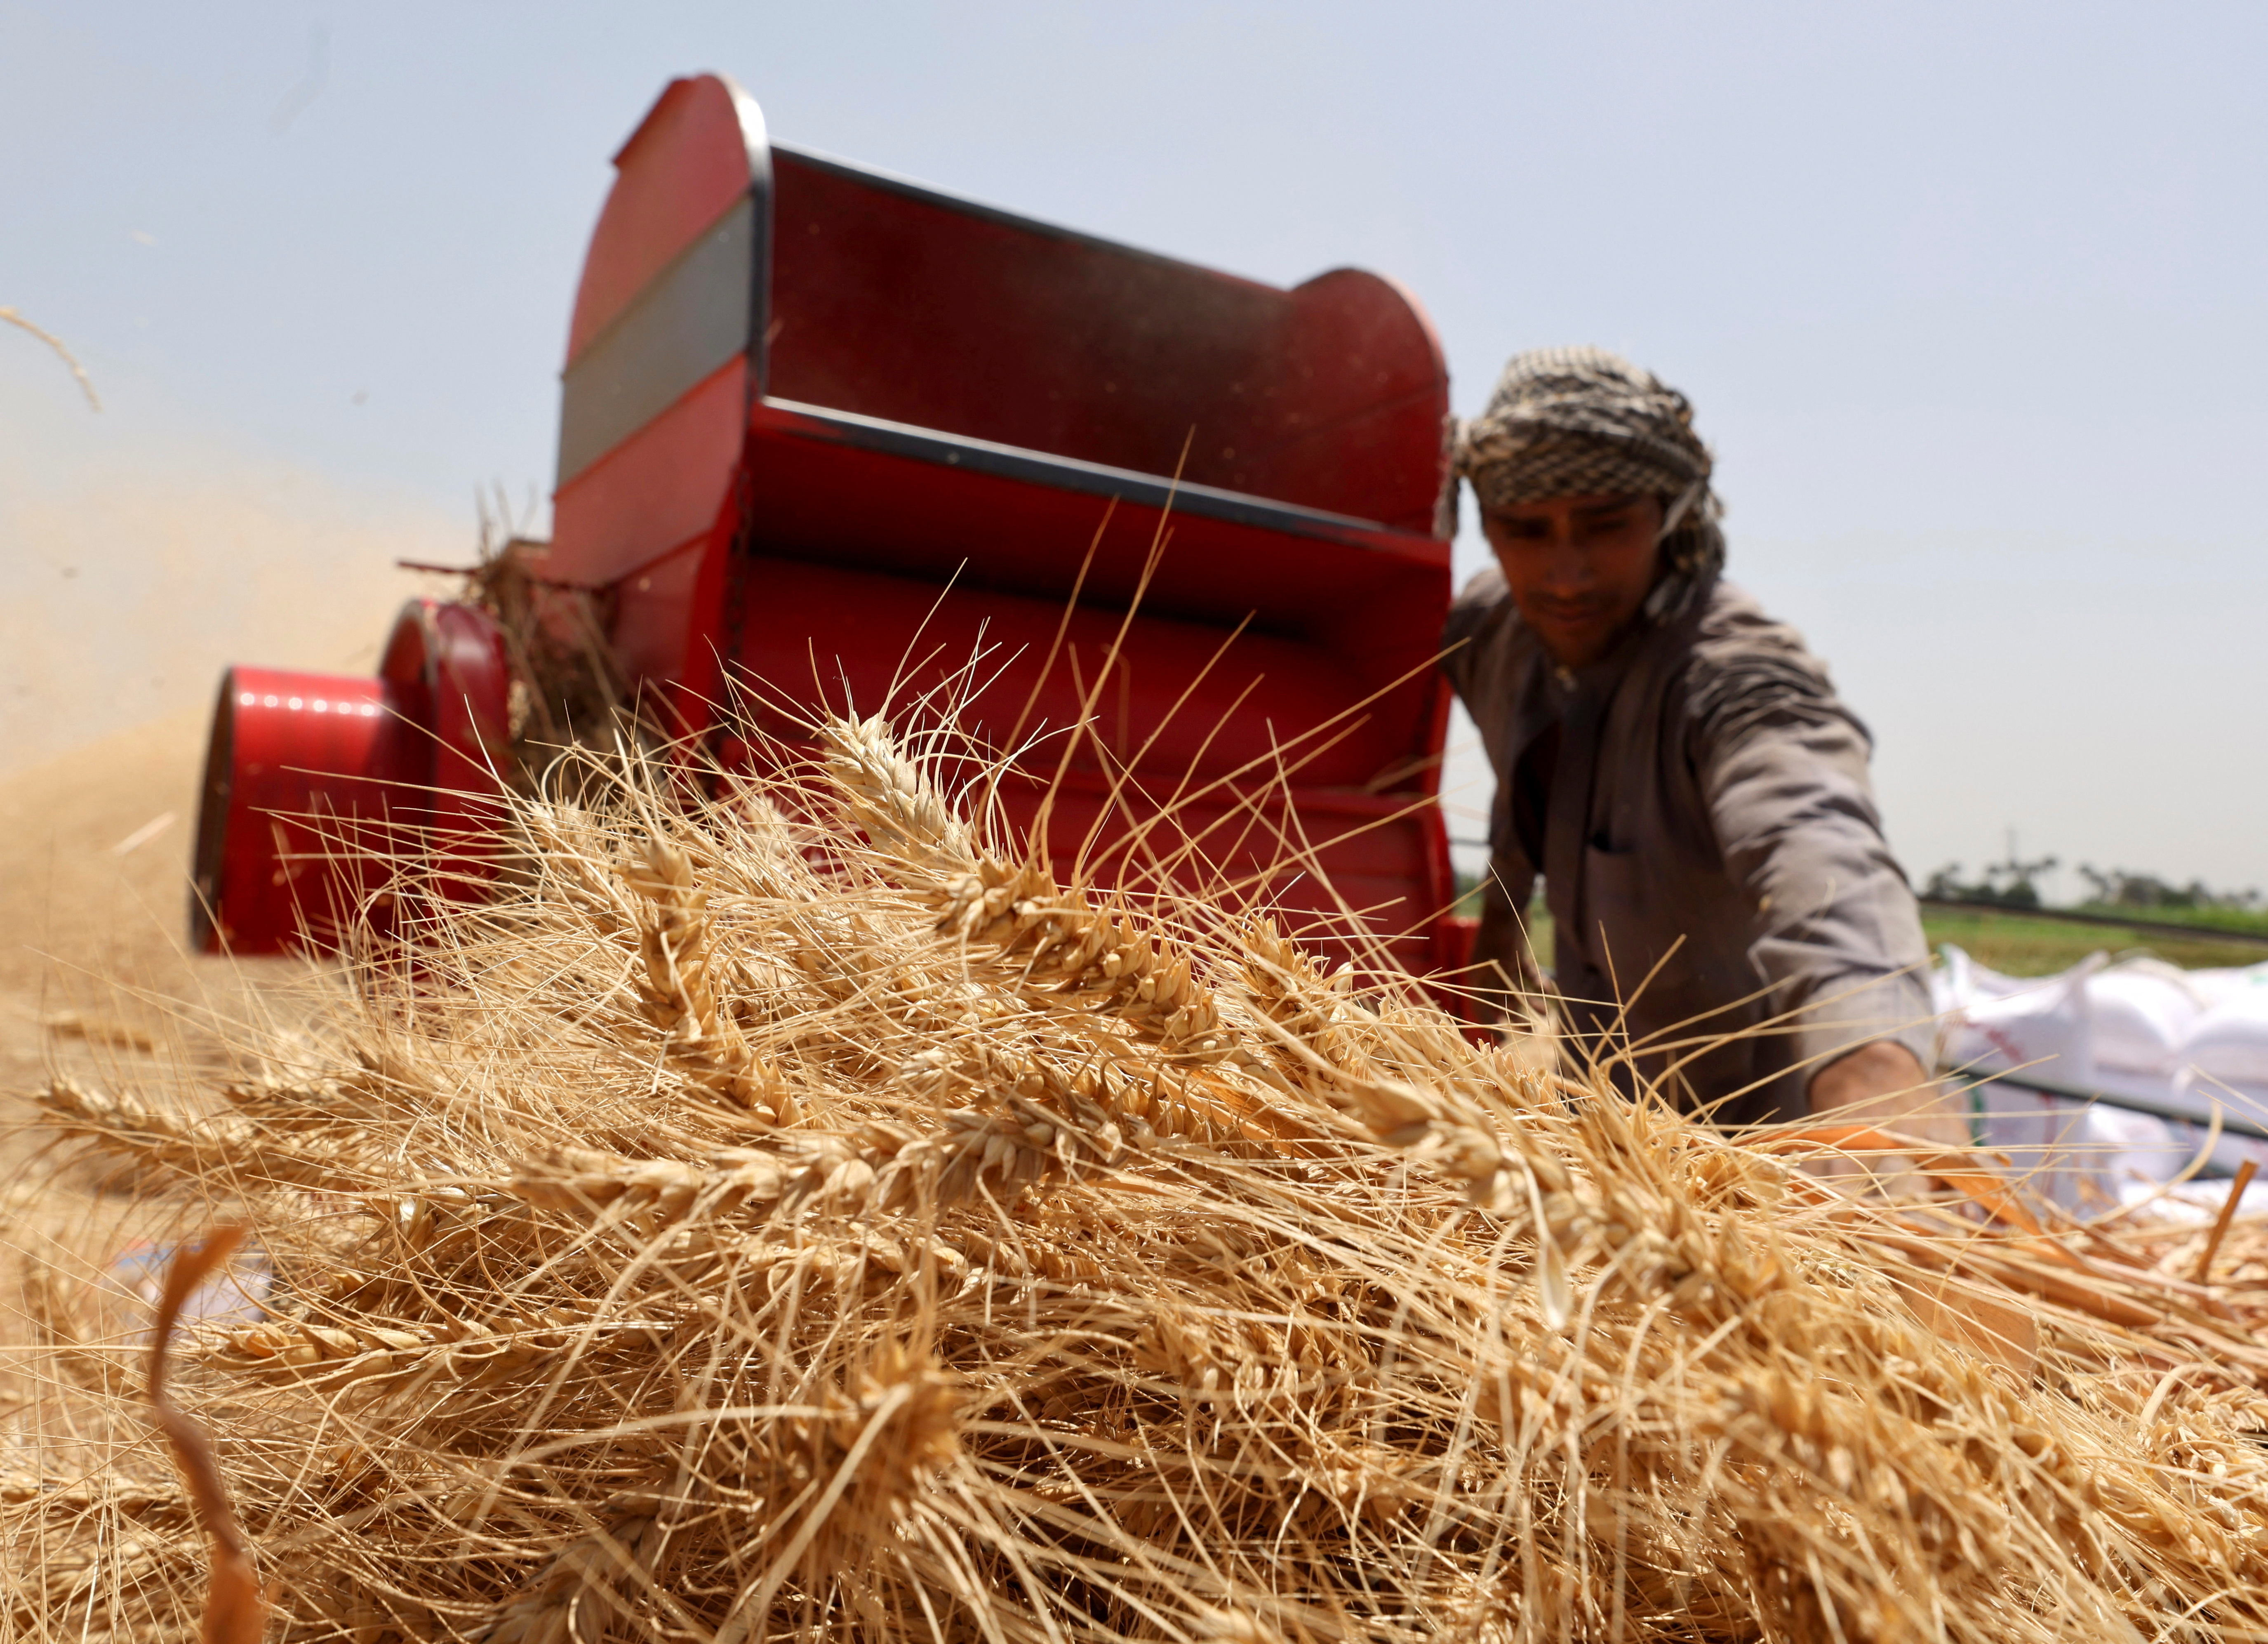 A farmer carries a bundle of wheat after harvesting it from a field in Al Qalyubia Governorate